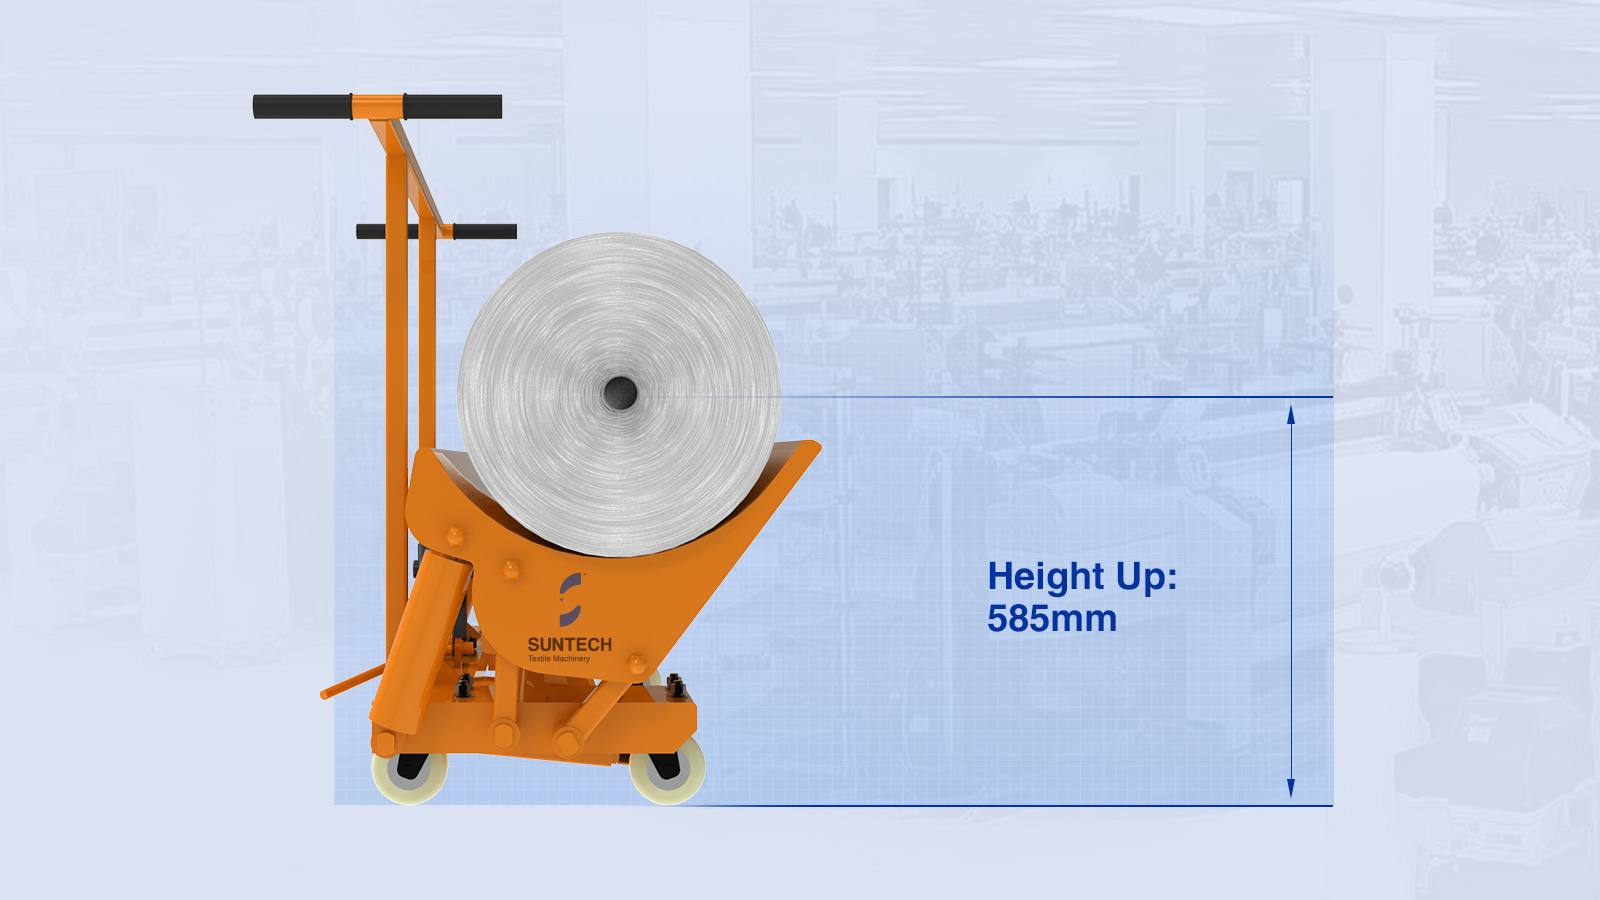 Maximum Center Height Up to 585 mm, Best Suitable for Loom Height